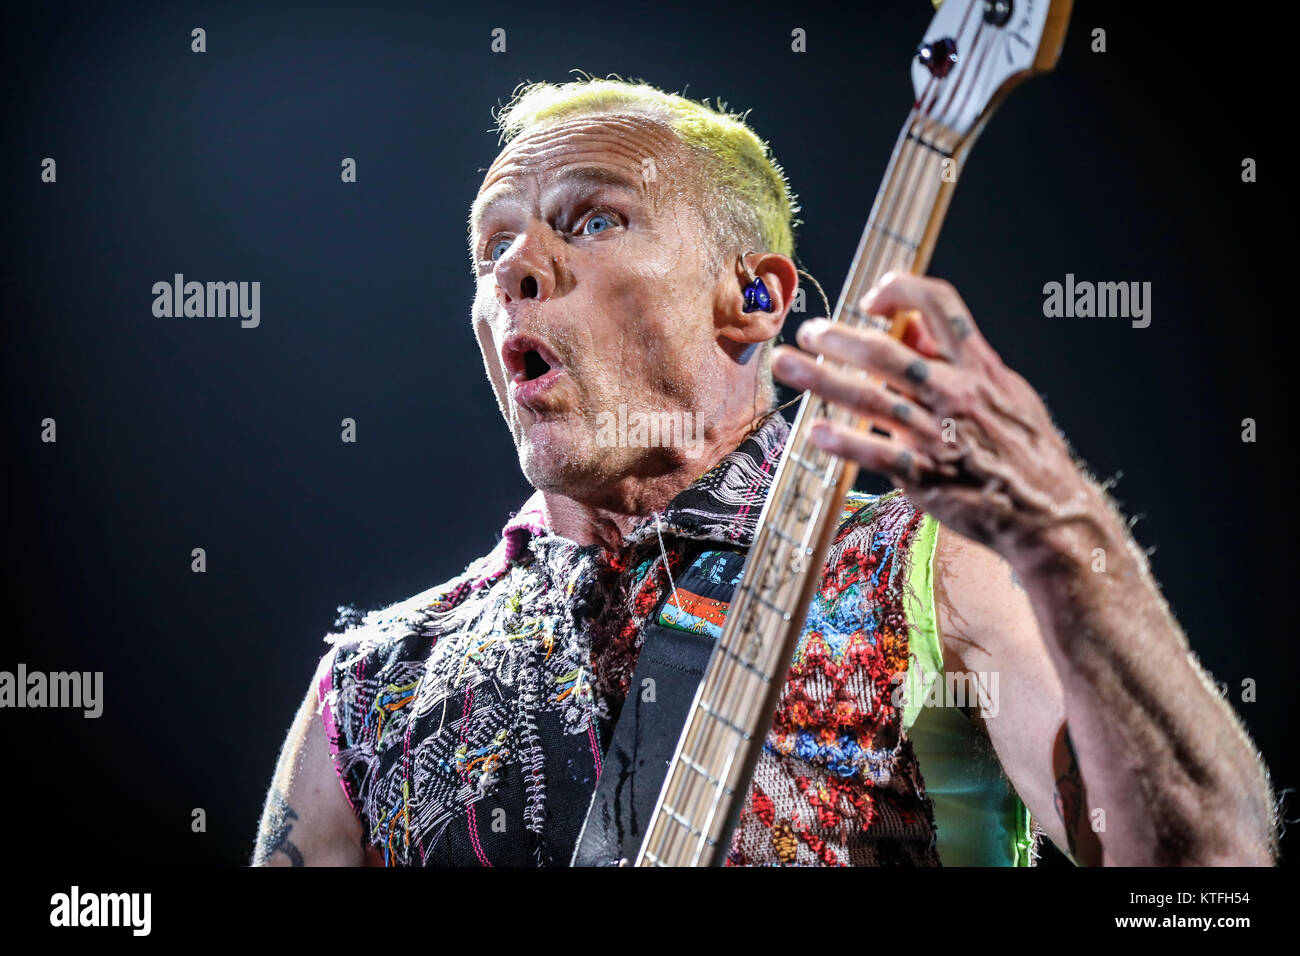 The American rock band Red Hot Chili Peppers performs a live concert at Orange Stage at Telenor Arena in Oslo. Here bass player Flea is seen live on stage. Norway, 08/09 2016. Stock Photo